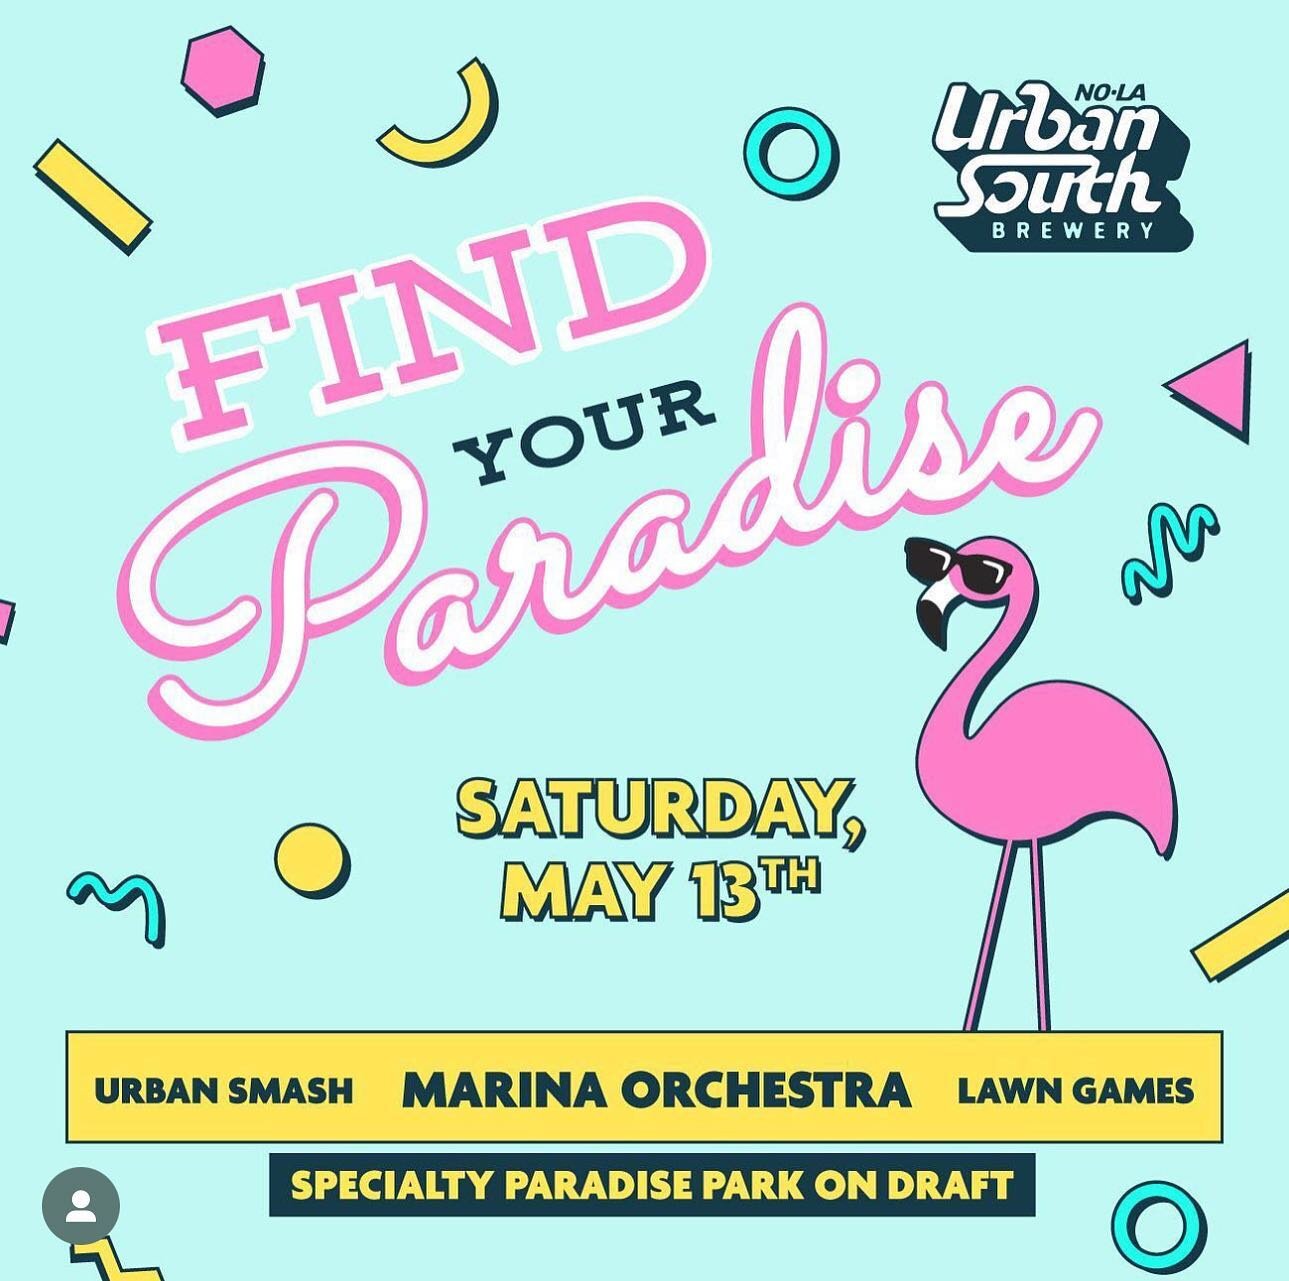 Come hang with @marinaorchestra at @urbansouthbeer today starting at 2:30!